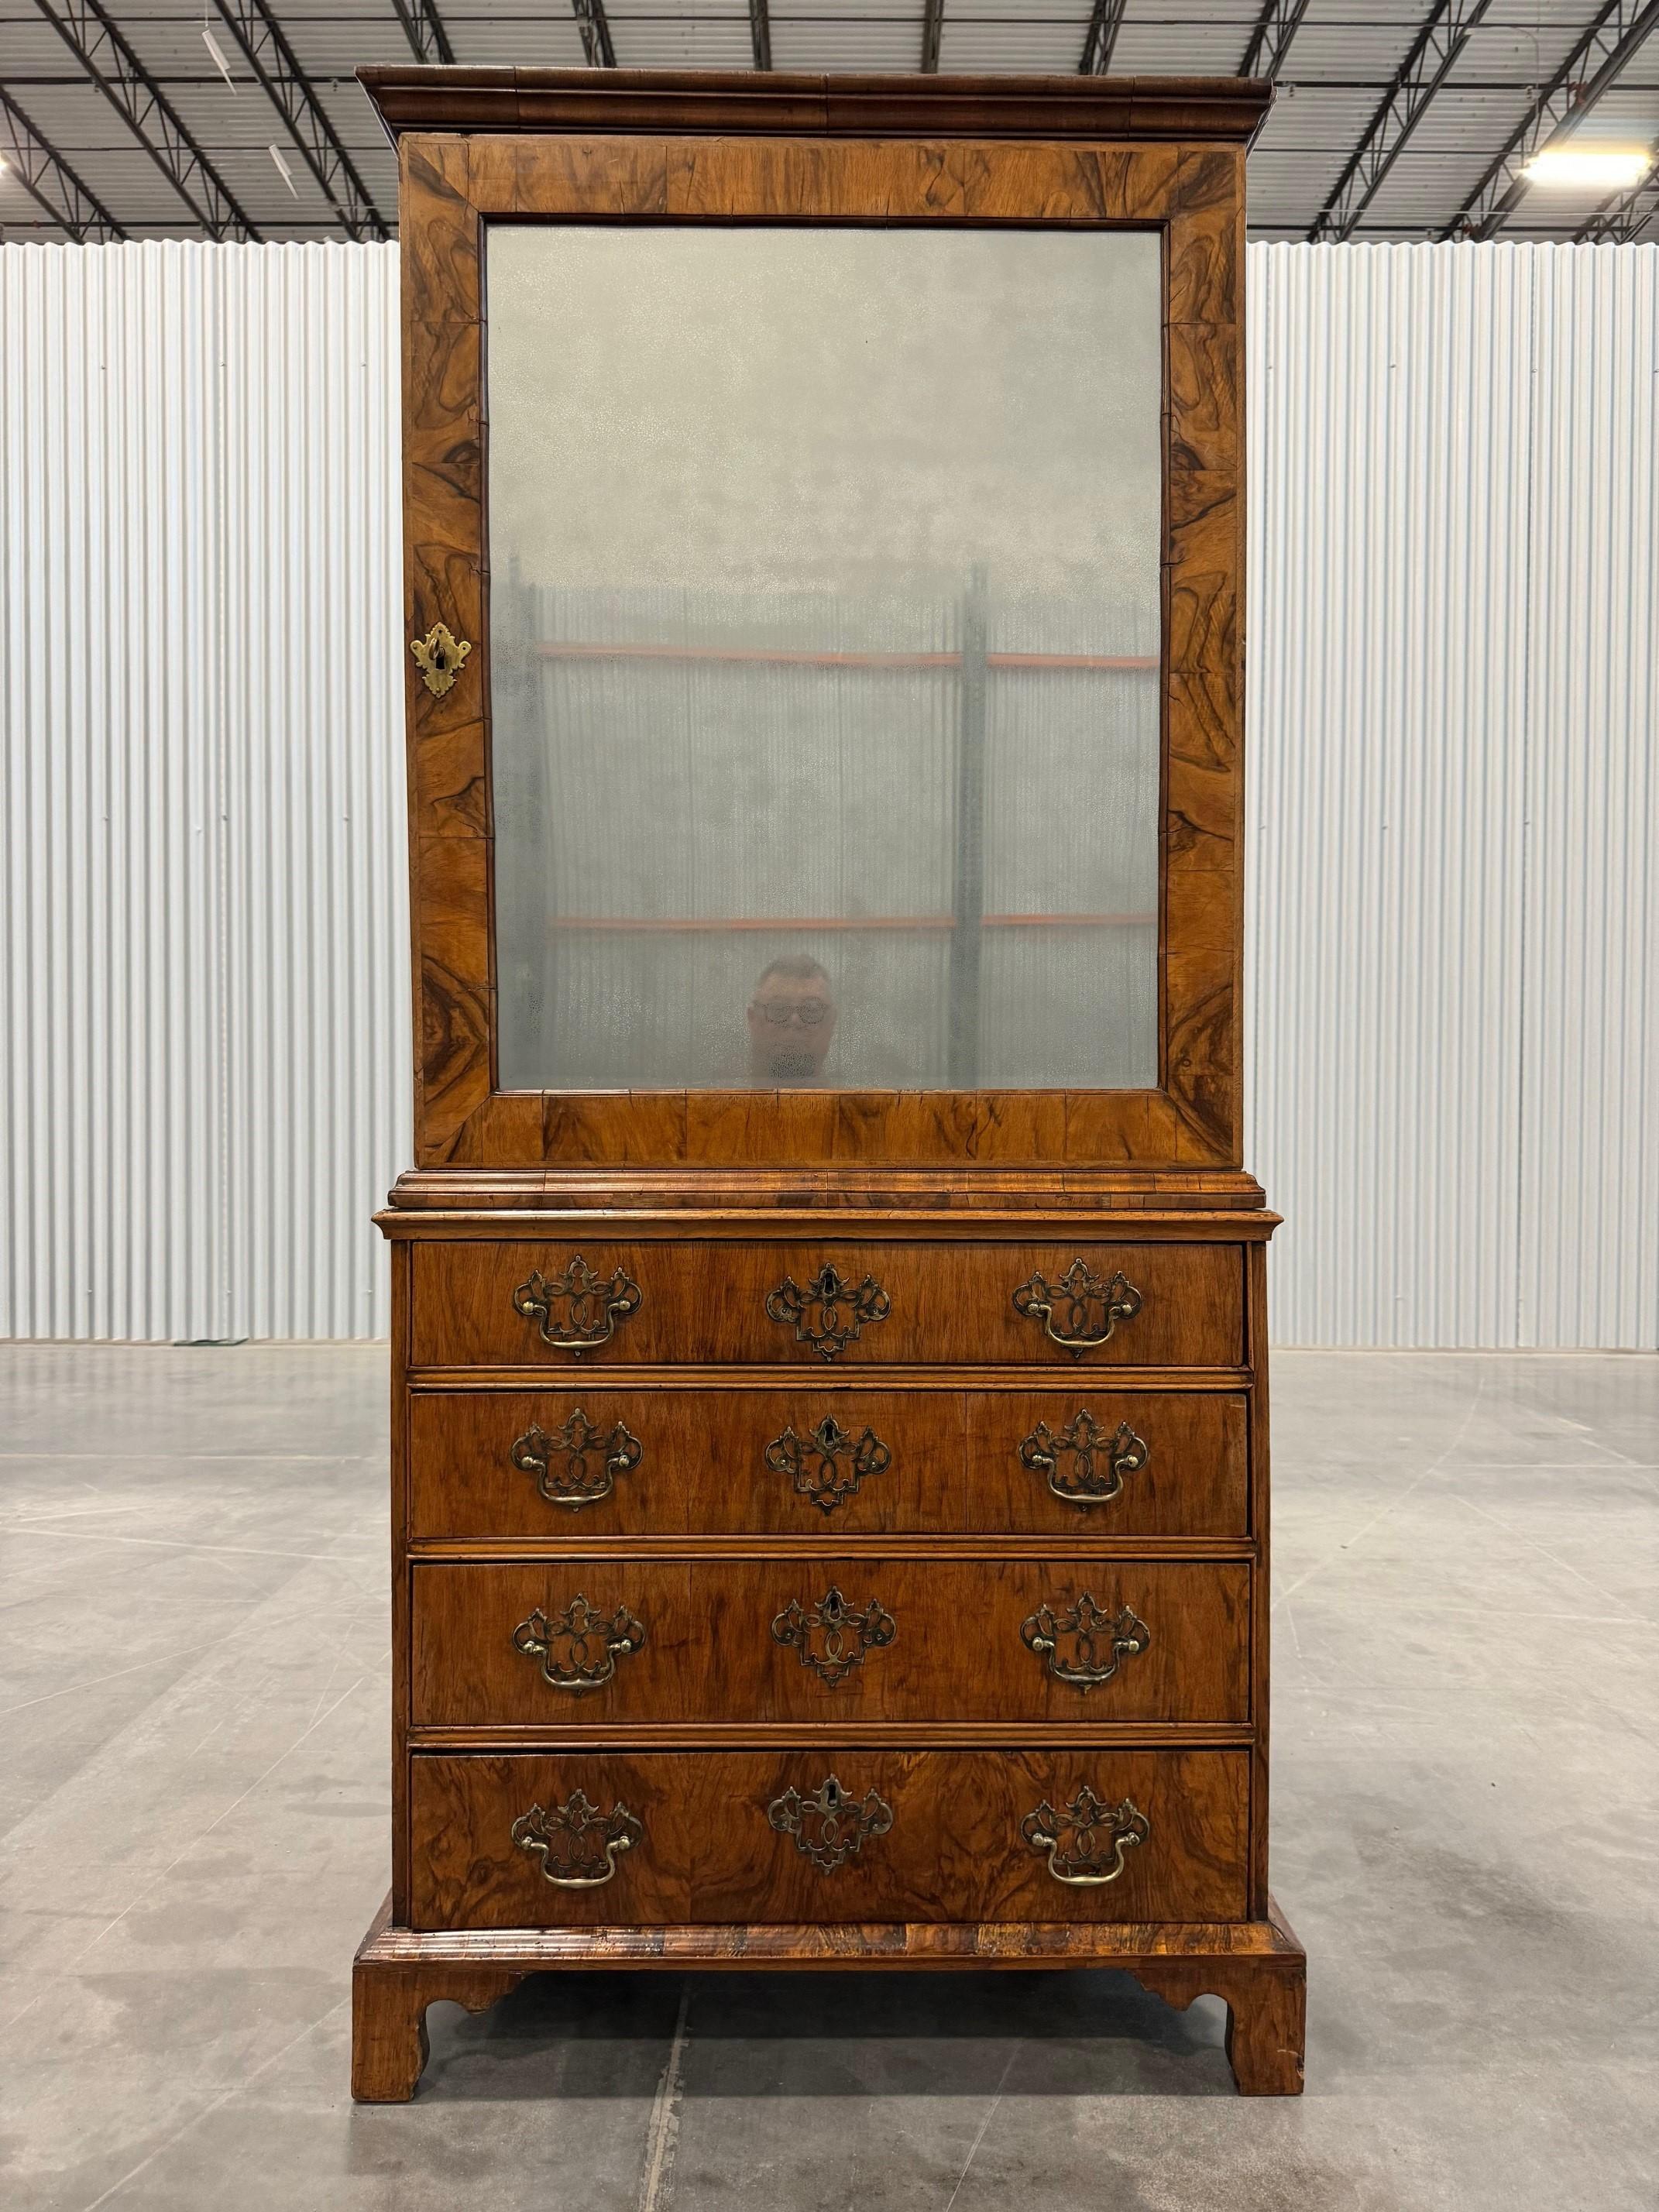 A very nice and rare George II walnut cabinet on chest, the top section with mirror paneled door, and banded border concealing three adjustable shelves, the lower section fitted with four graduating drawers, each with book-matched veneer fronts,